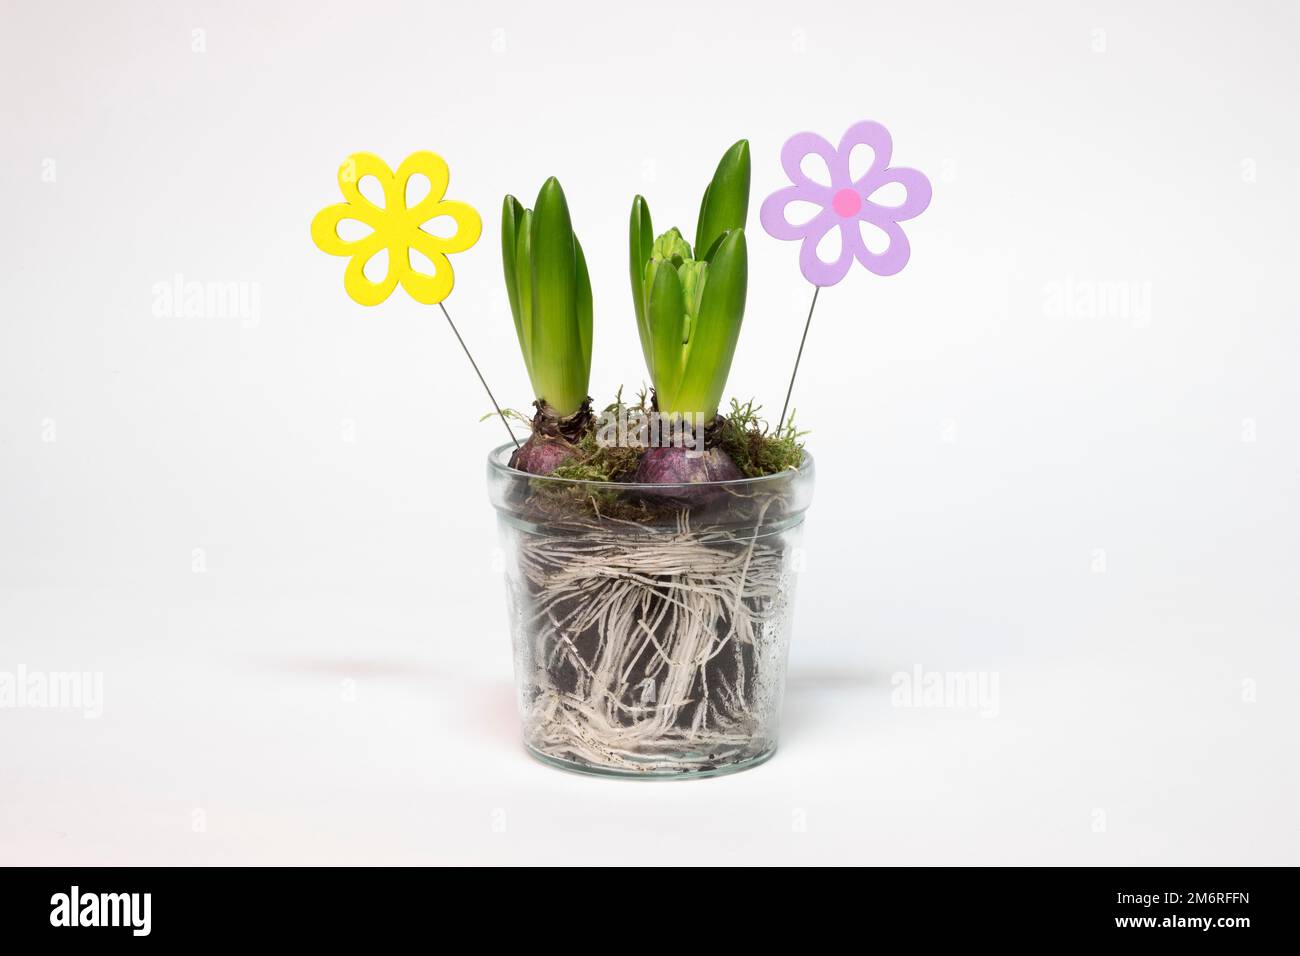 Garden hyacinth (Hyacinthus orientalis hybride) in glass pot, tubers, roots, studio photography, flower deco made of wood Stock Photo